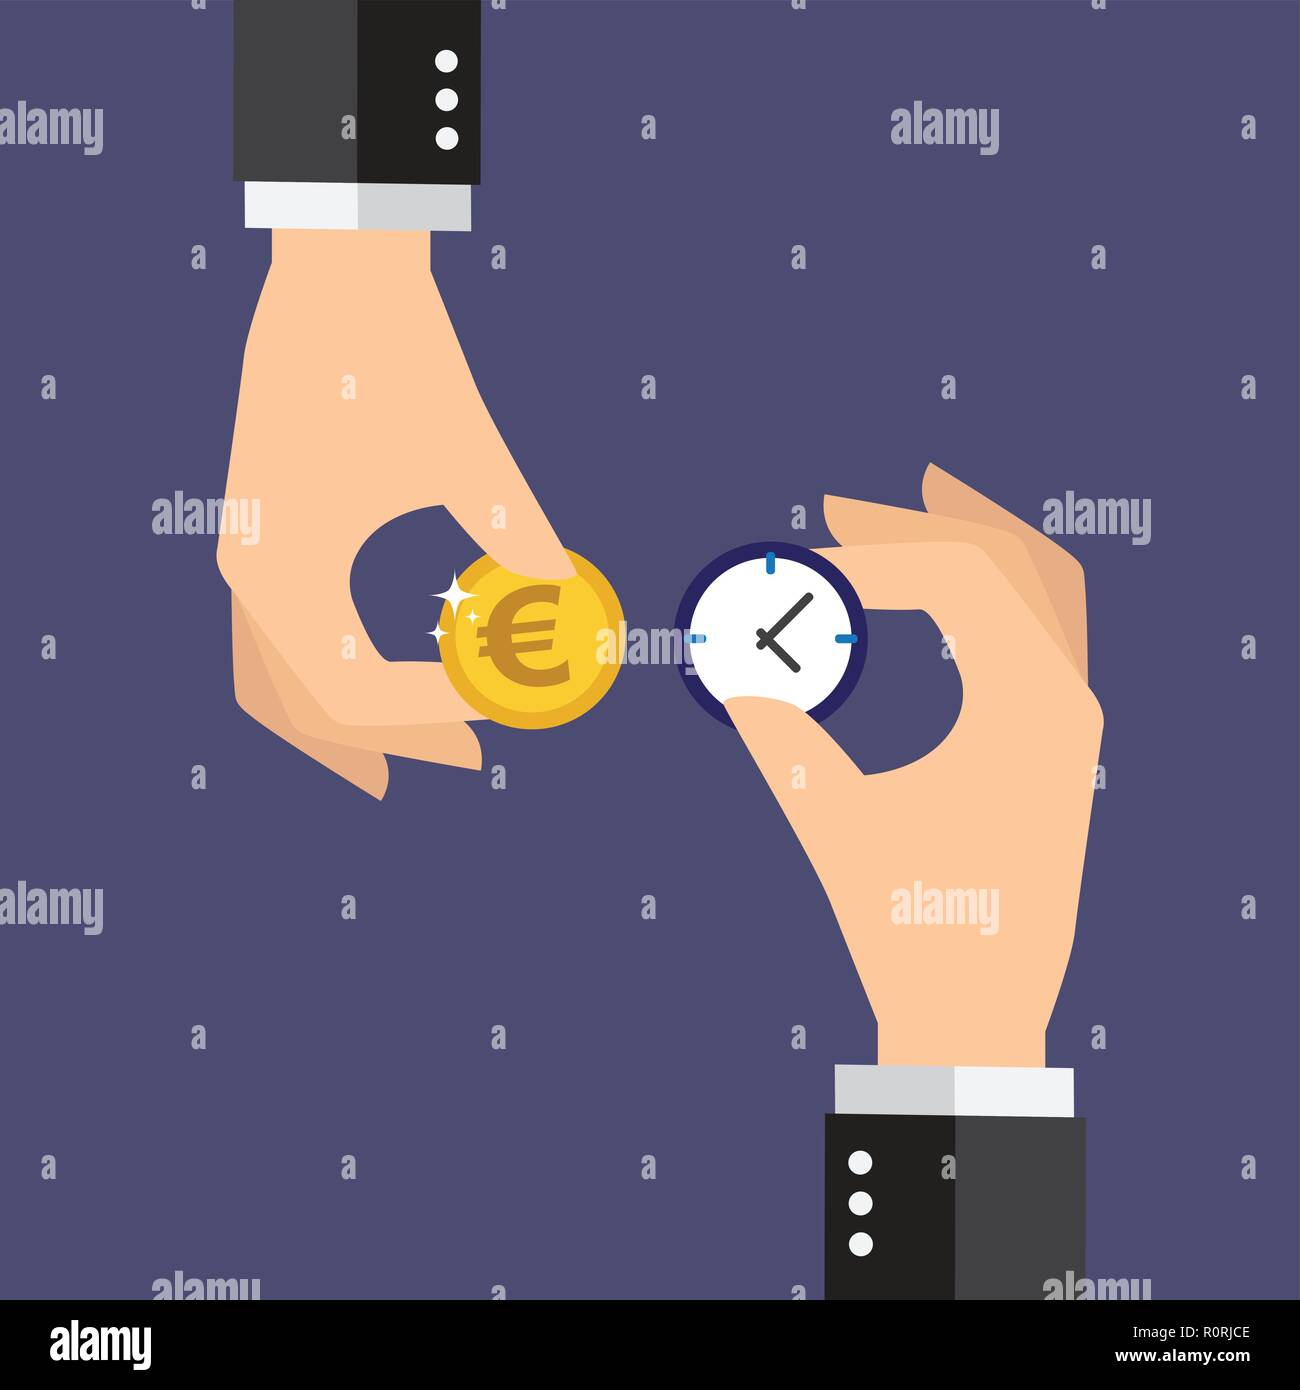 Illustration about time is money in vectors. Stock Vector